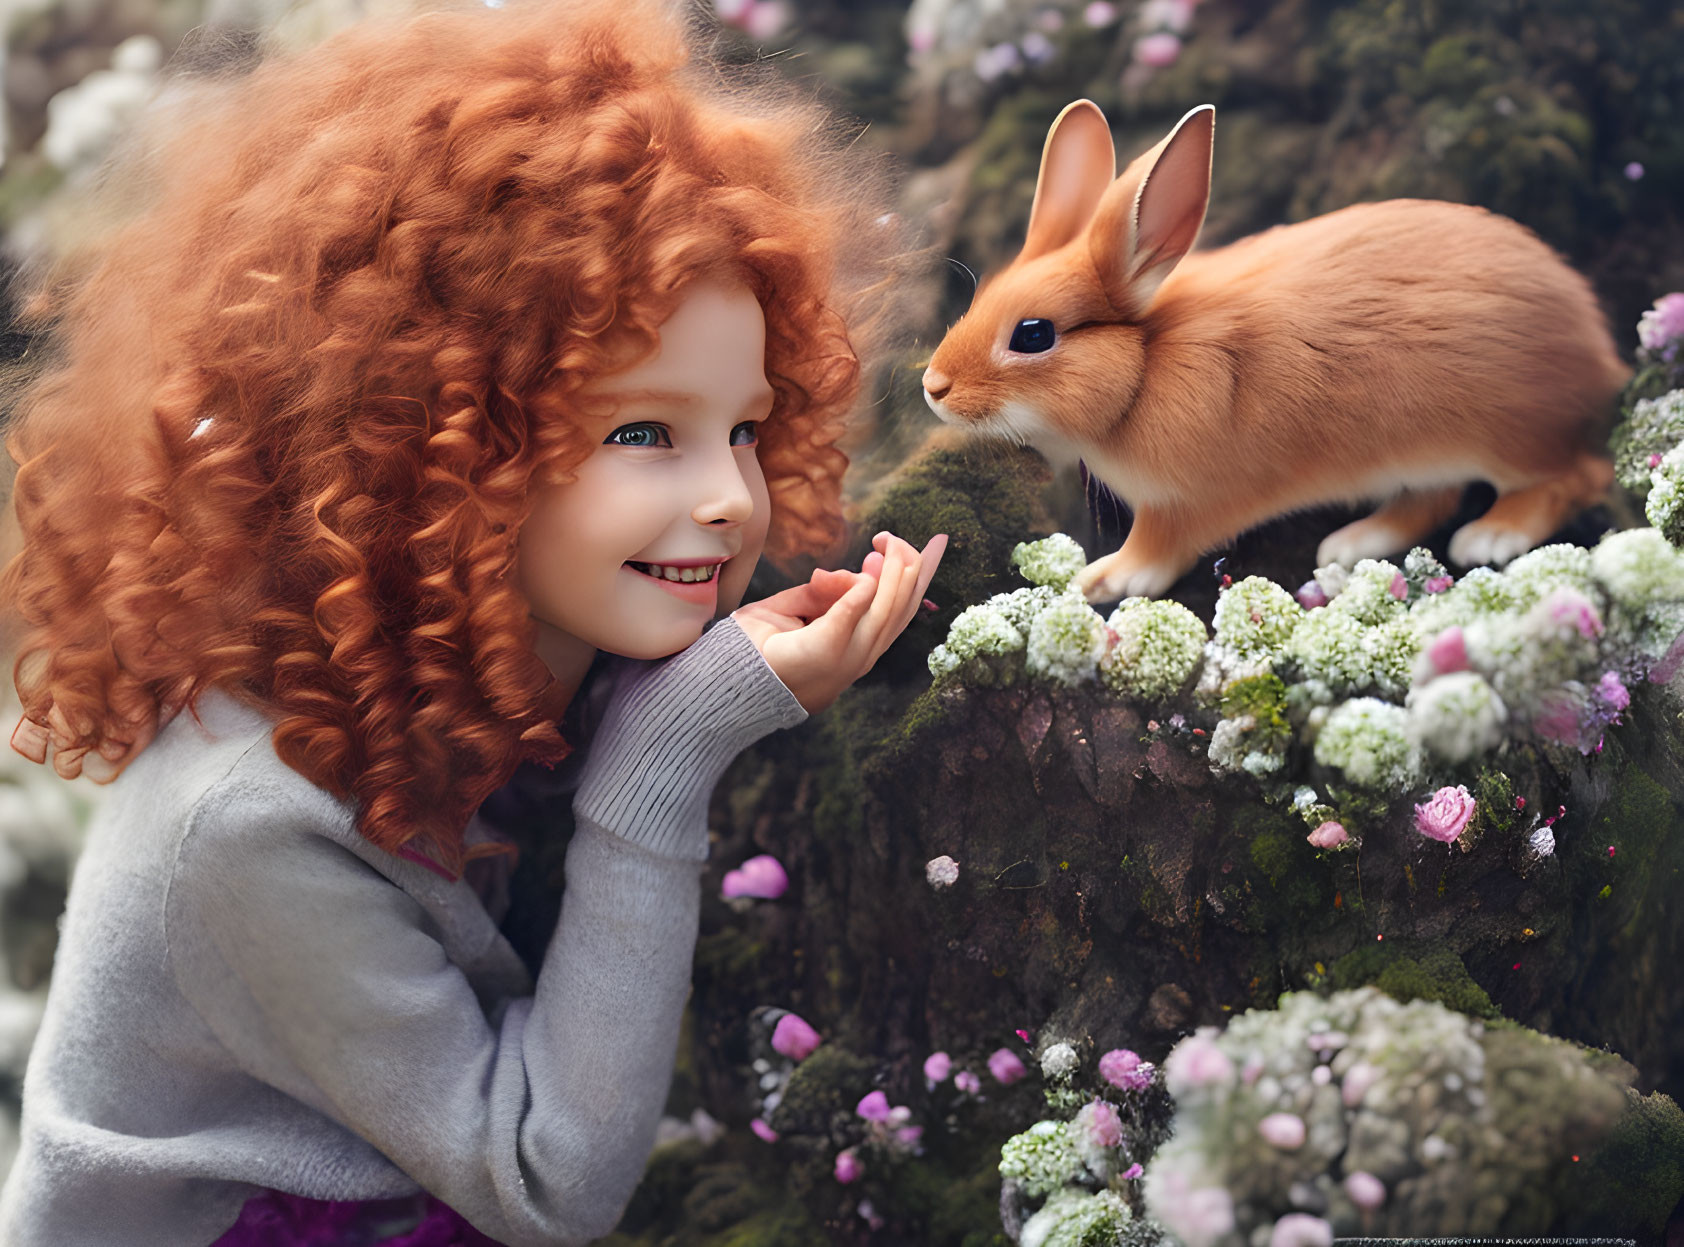 Child with red hair smiling at rabbit in flower garden